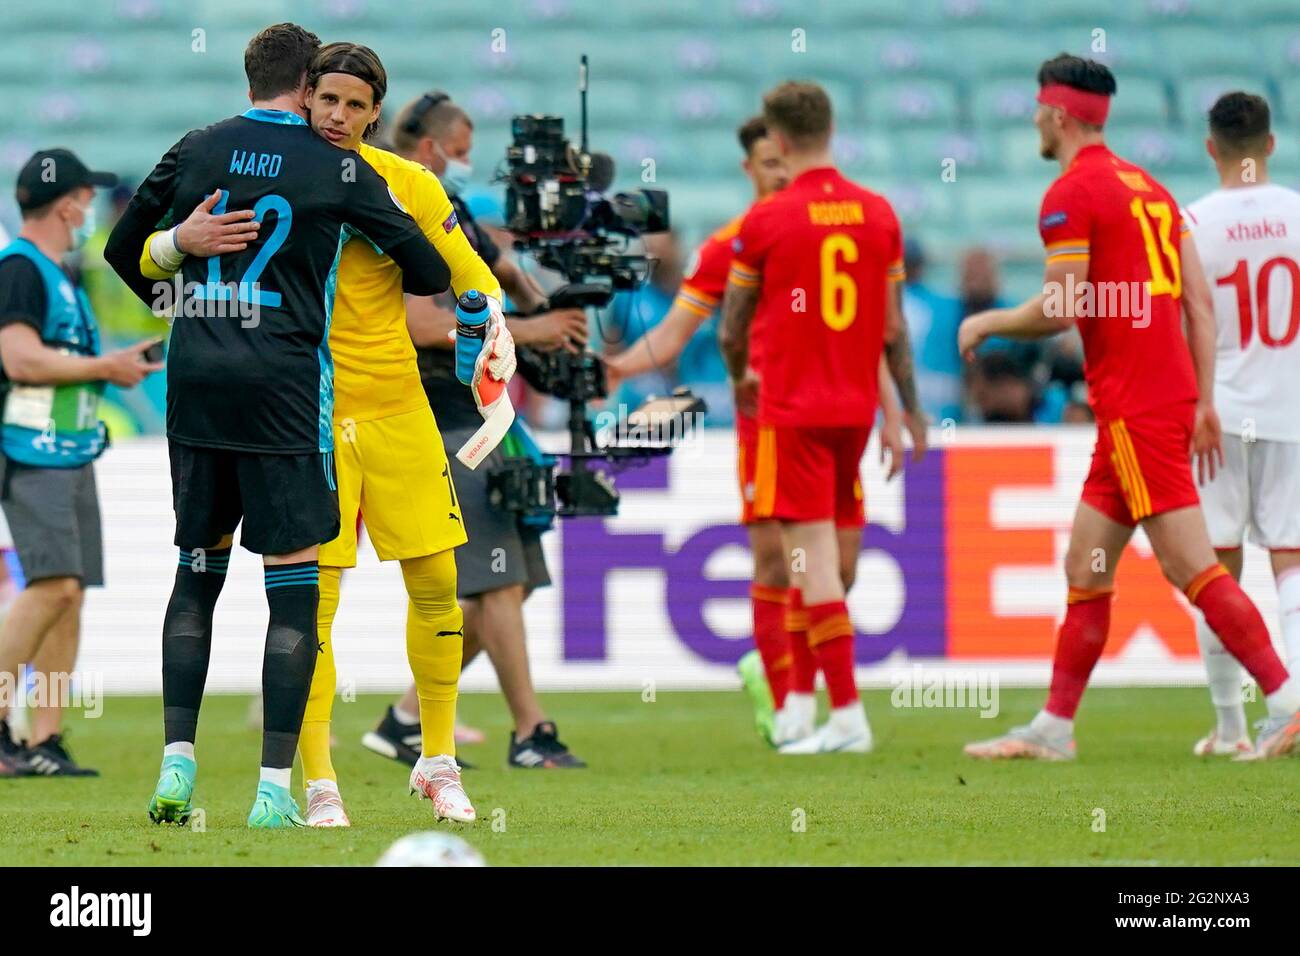 Wales goalkeeper Danny Ward and Switzerland goalkeeper Yann Sommer embrace after the UEFA Euro 2020 Group A match at the Baku Olympic Stadium, Azerbaijan. Picture date: Saturday June 12, 2021. Stock Photo